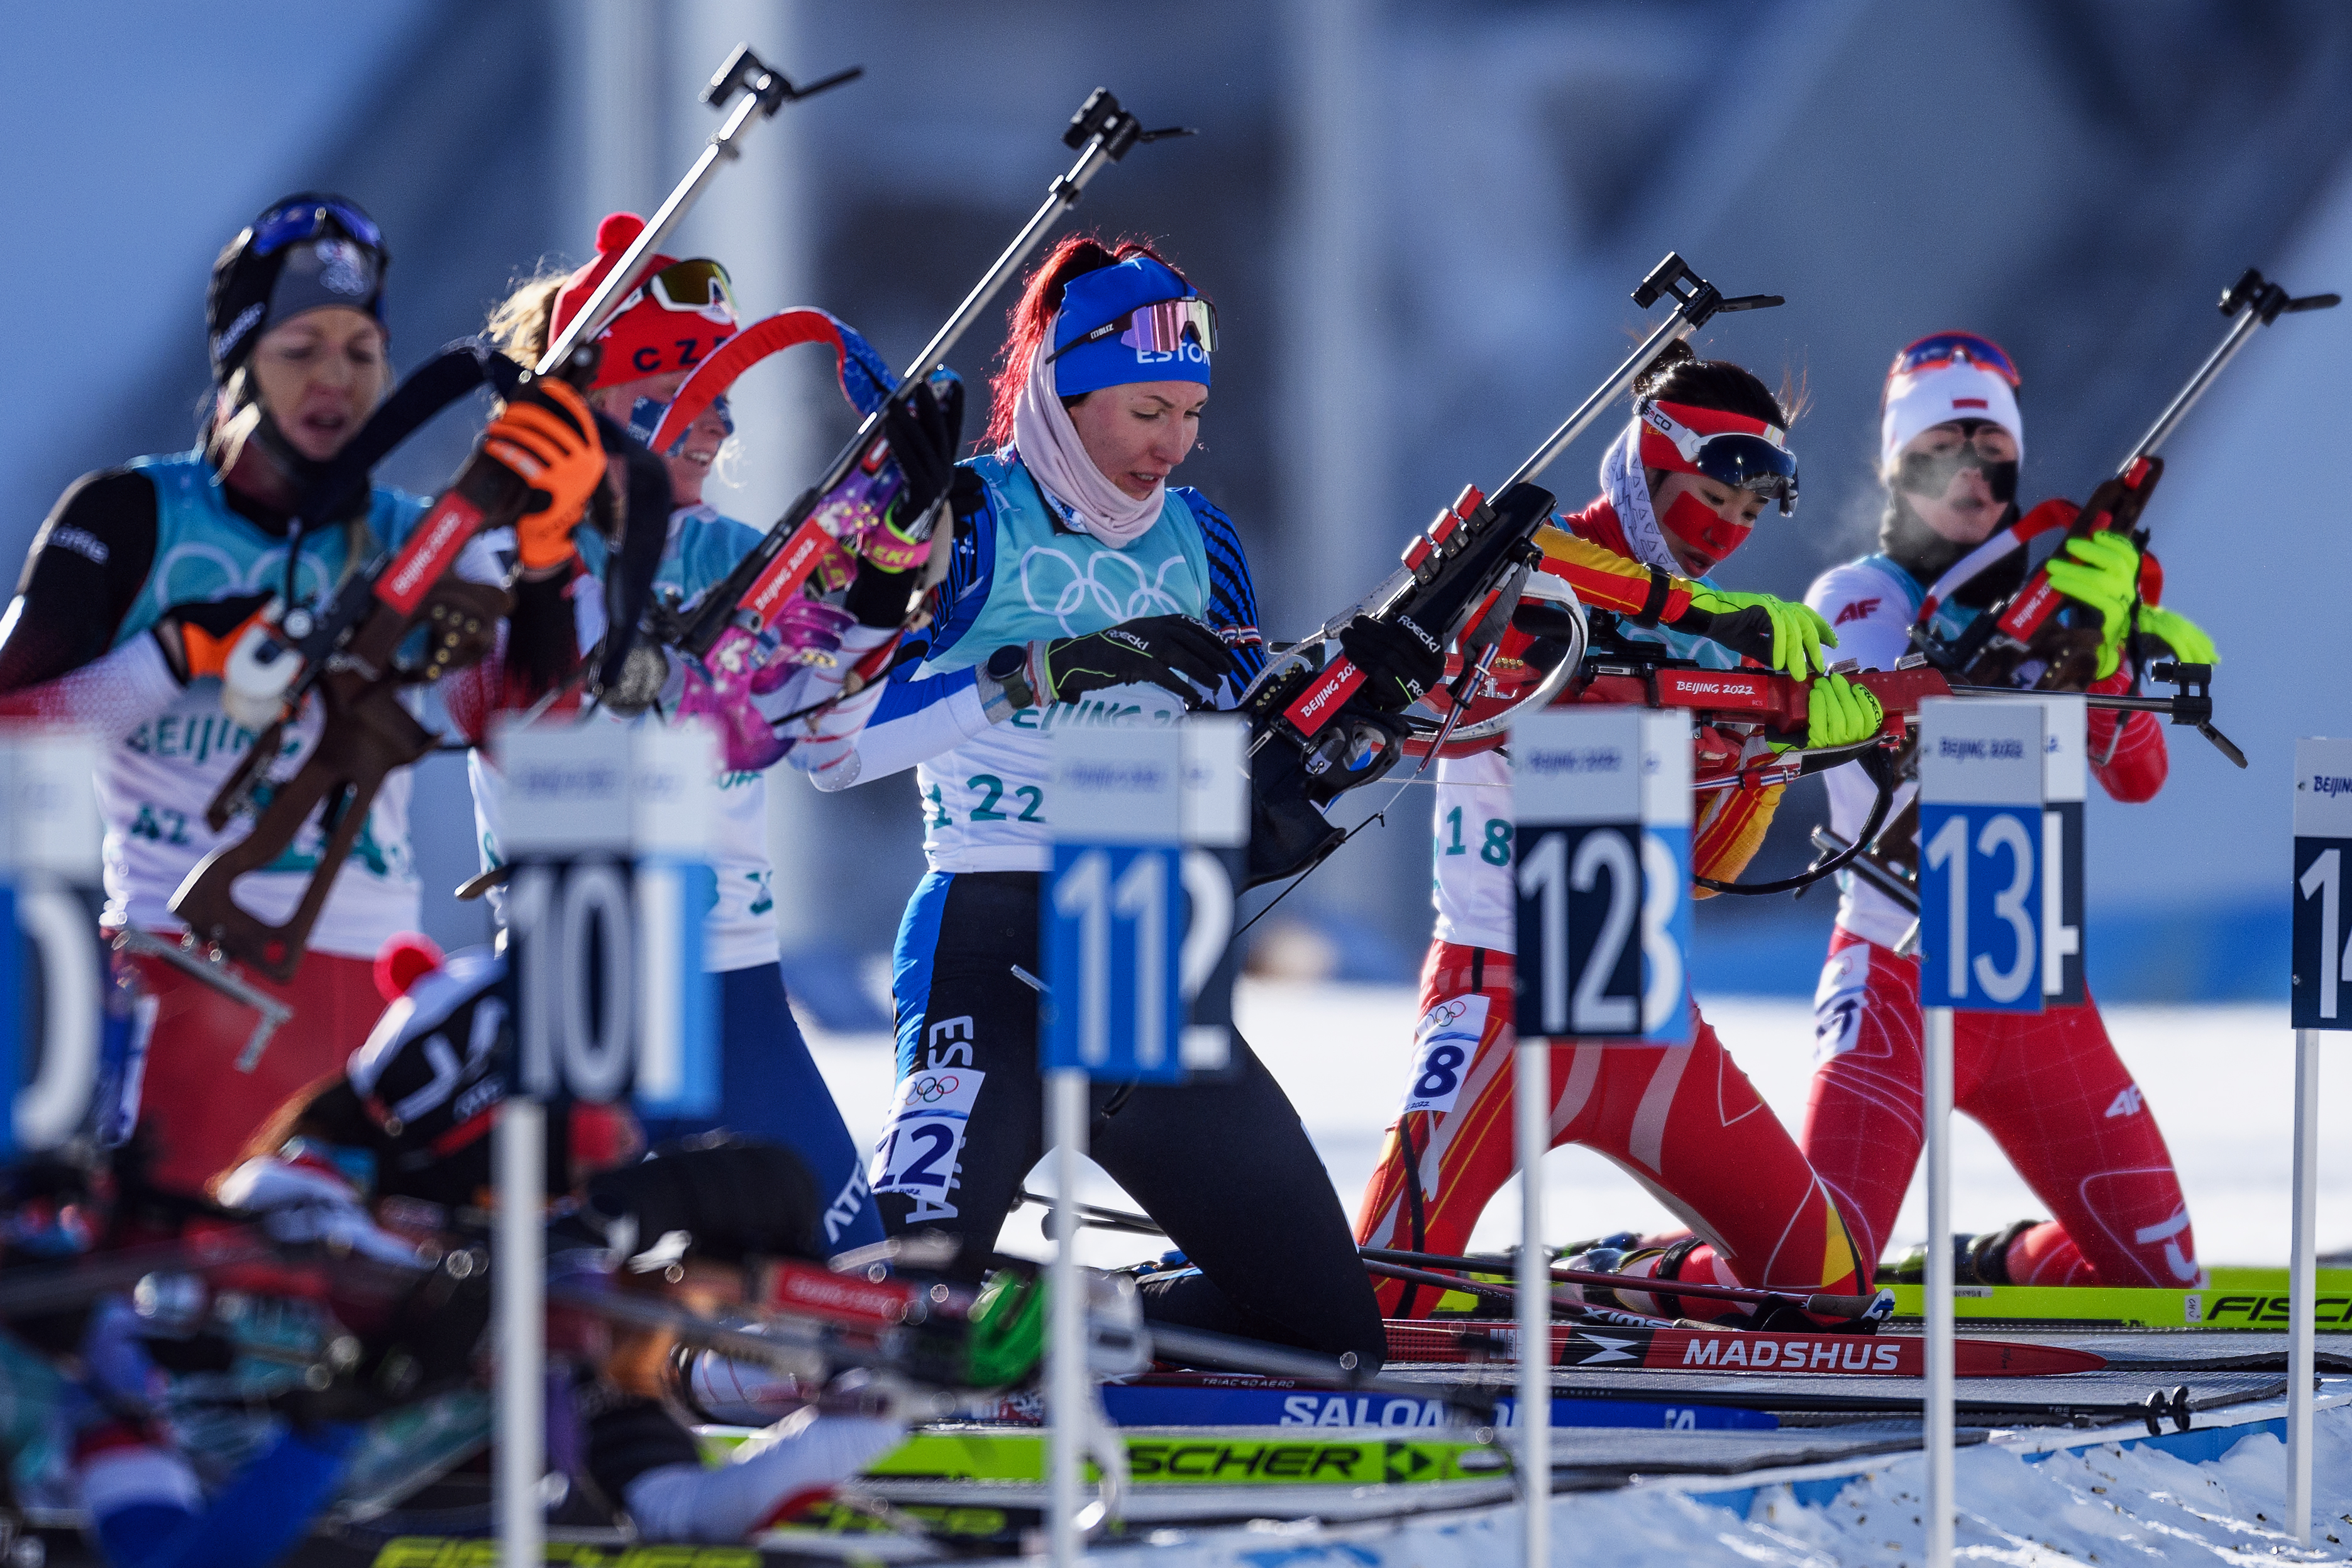 ZHANGJIAKOU, CHINA - FEBRUARY 16: Athletes shoot during the second leg of the Women's Biathlon 4x6km Relay on day 12 of 2022 Beijing Winter Olympics at National Biathlon Centre on February 16, 2022 in Zhangjiakou, China. (Photo by Matthias Hangst/Getty Images)